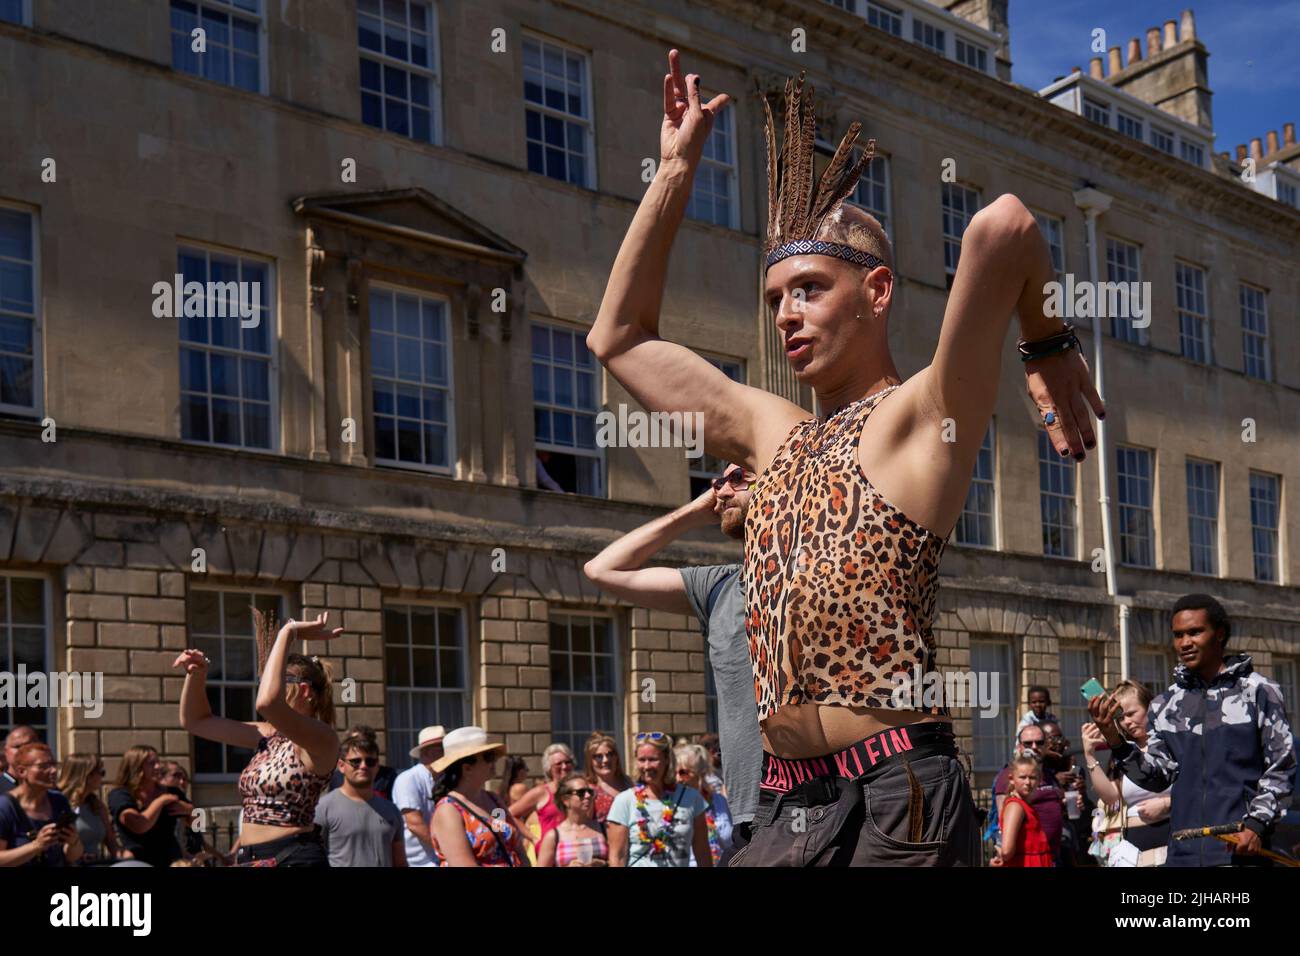 Dancers in ornate costumes performing at the annual carnival as it progresses through the streets of the historic city of Bath in Somerset. Stock Photo